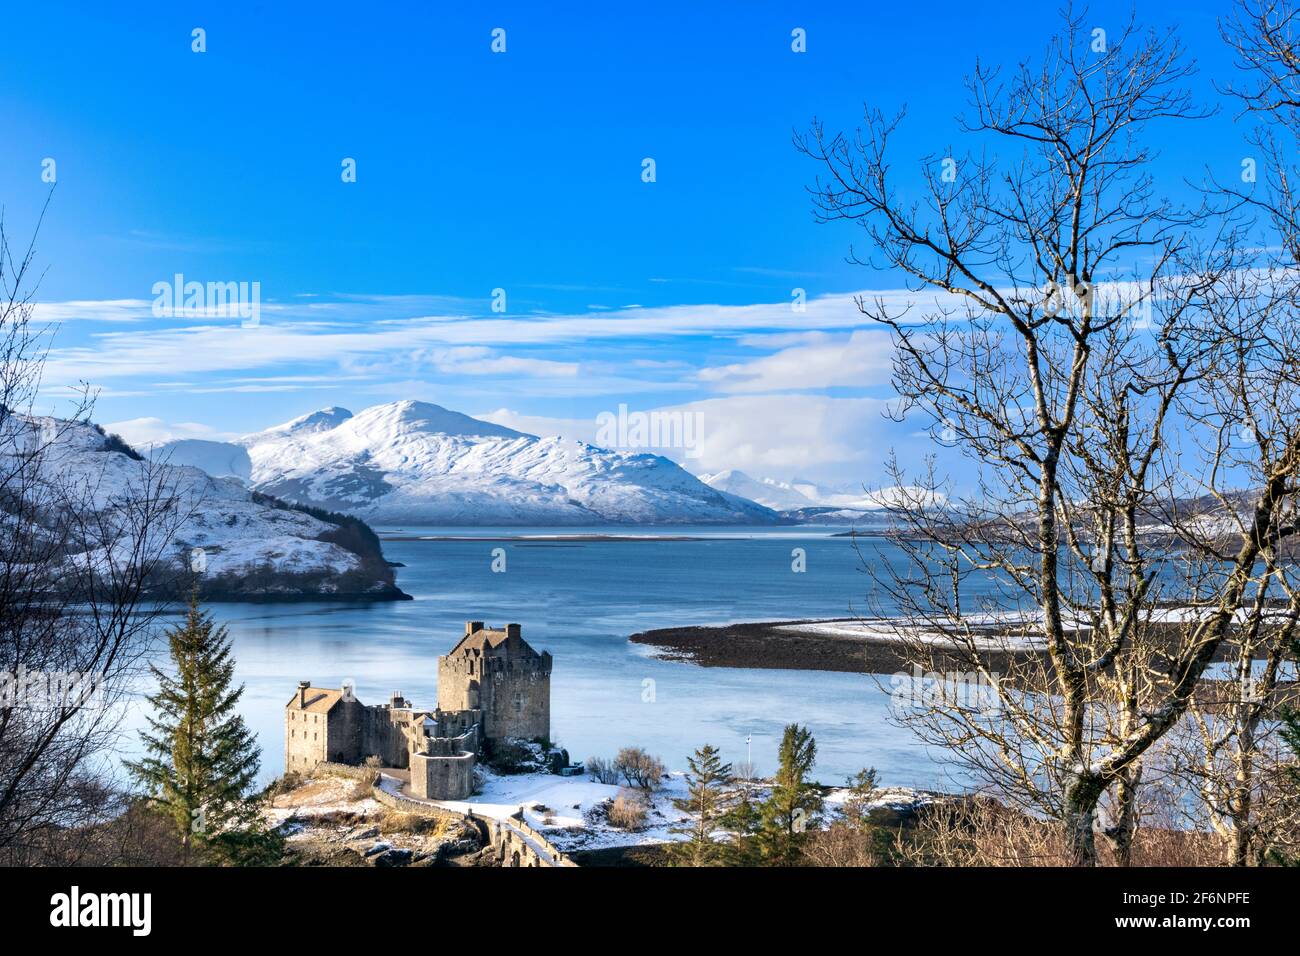 EILEAN DONAN CASTLE LOCH DUICH HIGHLAND SCOTLAND A BLUE SKY THE CASTLE IN WINTER  WITH A HEAVY FALL OF SNOW ON THE  HILLS Stock Photo